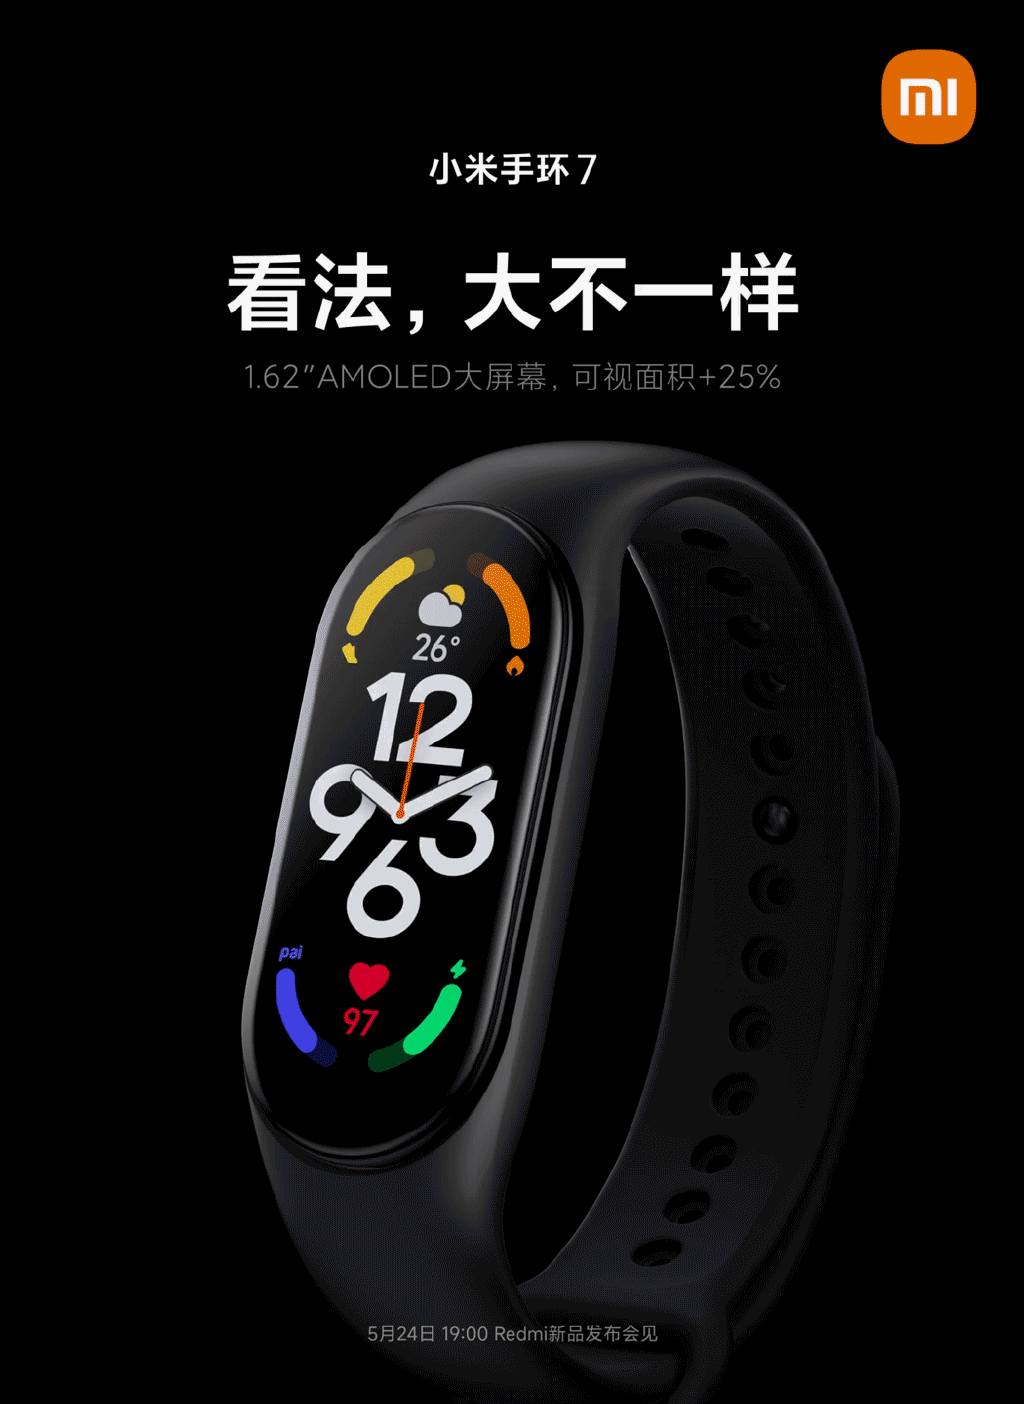 Leaked Xiaomi Band 7 box confirms battery upgrade and other features of the  Mi Band 6's successor -  News